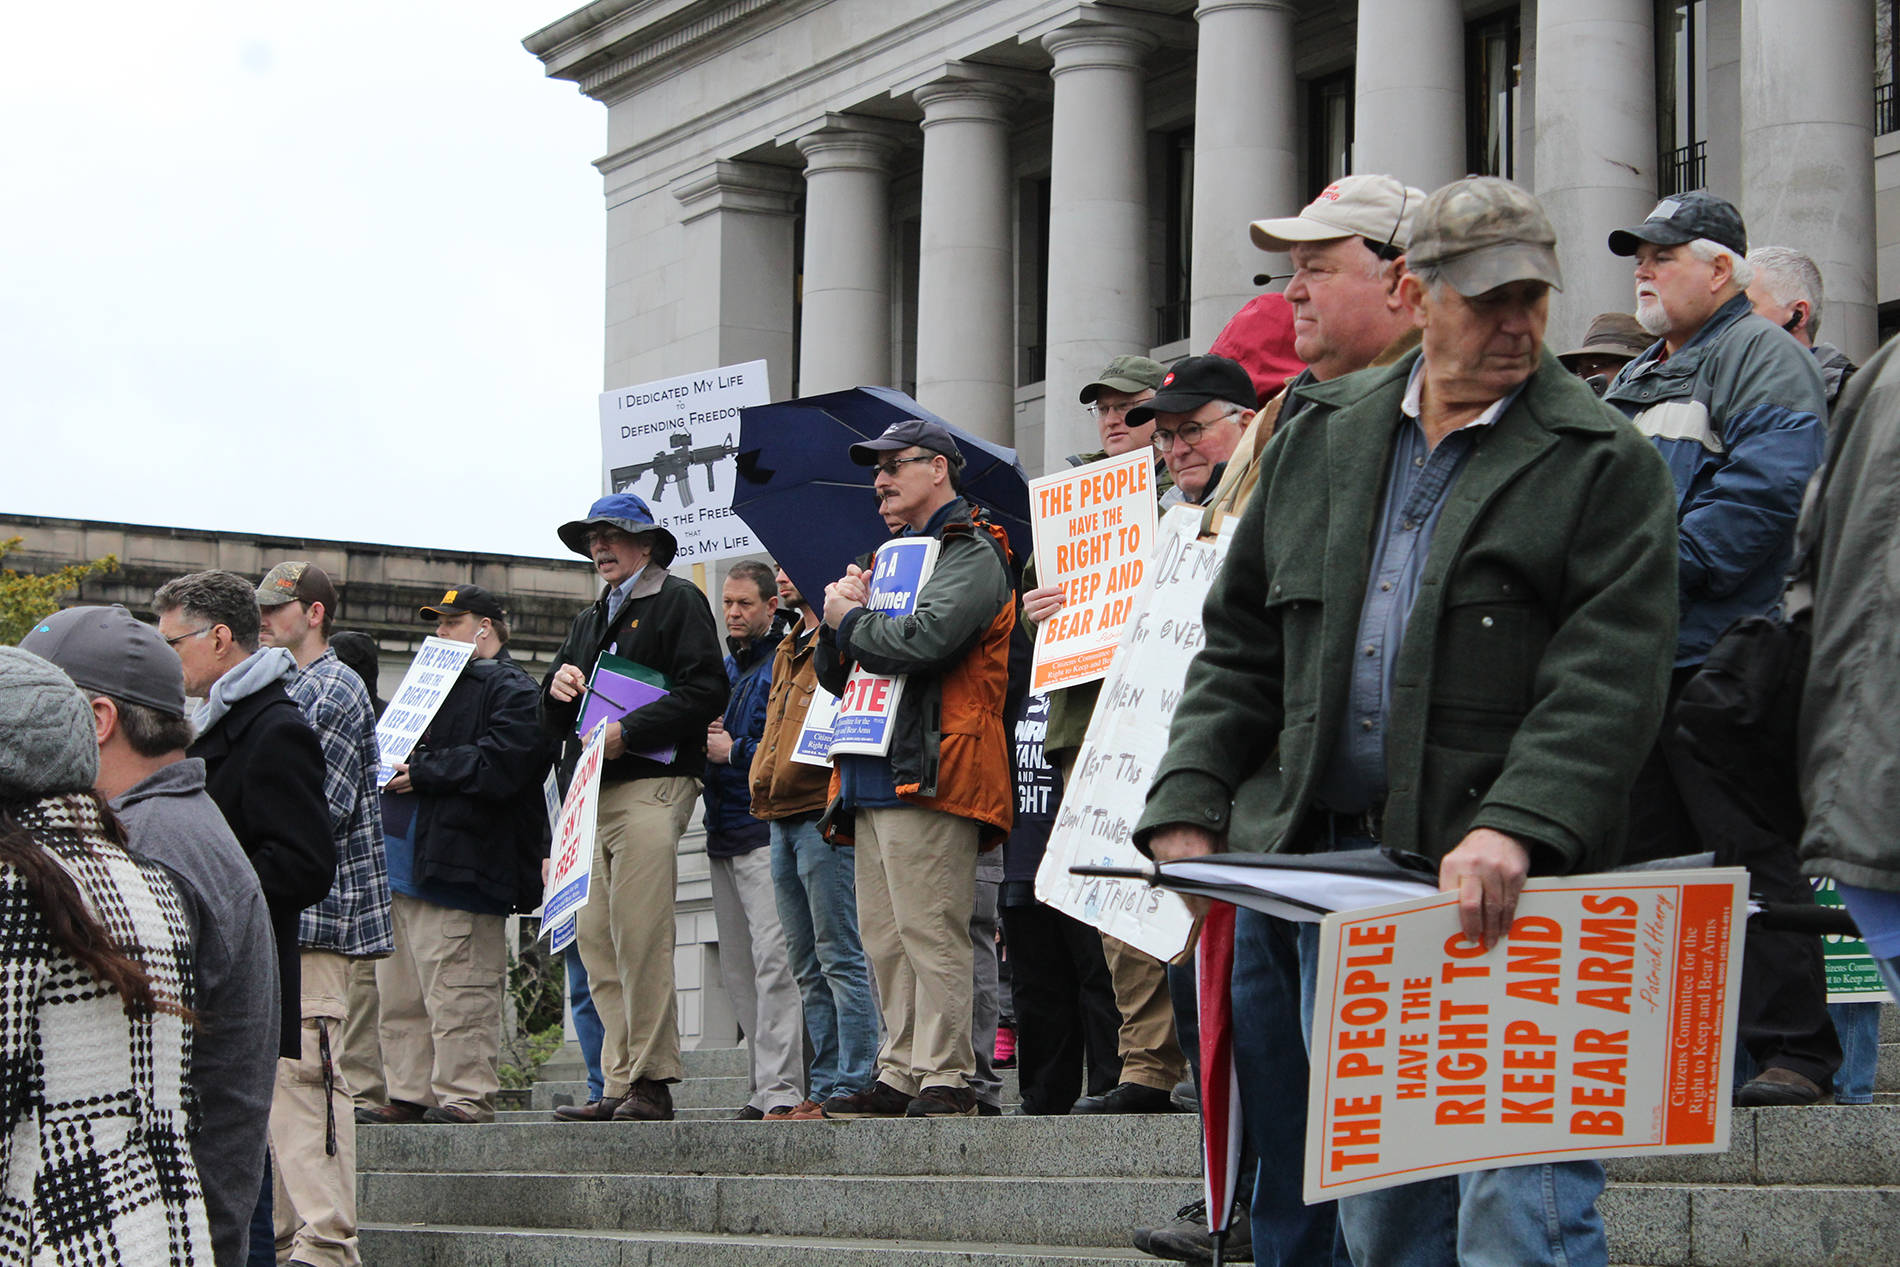 Gun rights supporters gather on the steps of the Capitol building for a rally on Friday. Taylor McAvoy/WNPA Olympia News Bureau